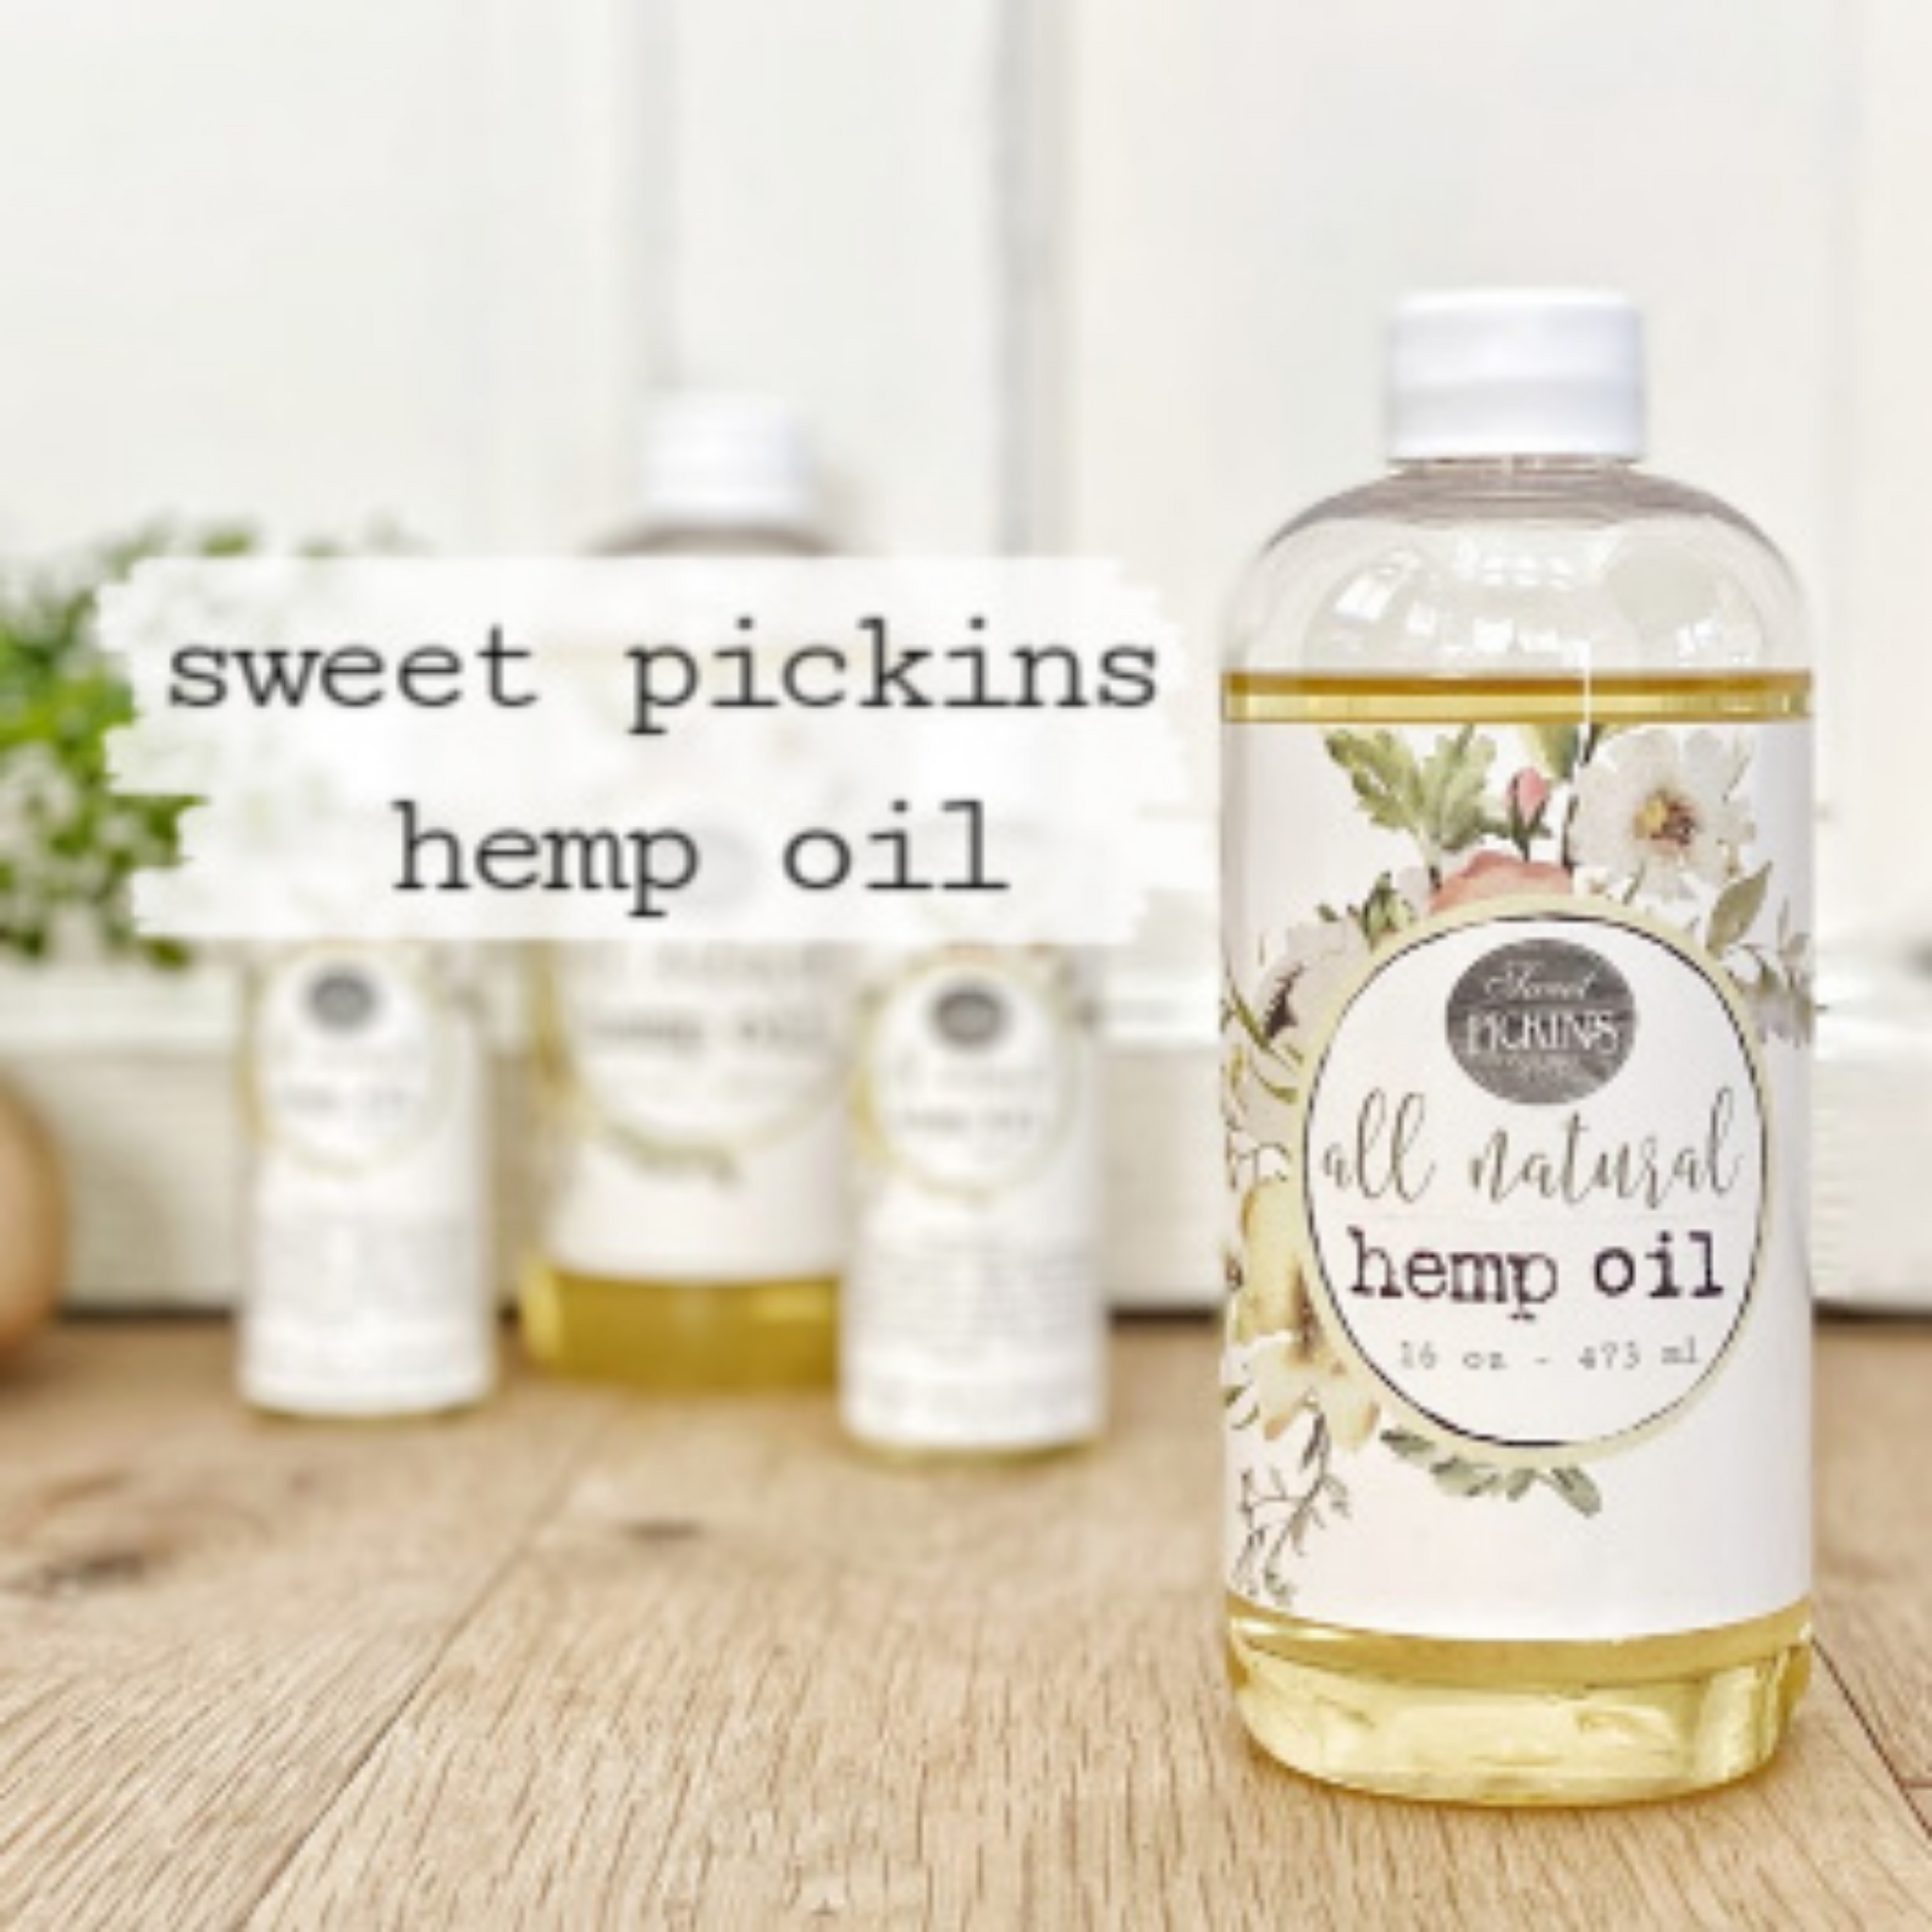 Product photo of Sweet Pickins all natural Hemp Oil available at Milton's Daughter